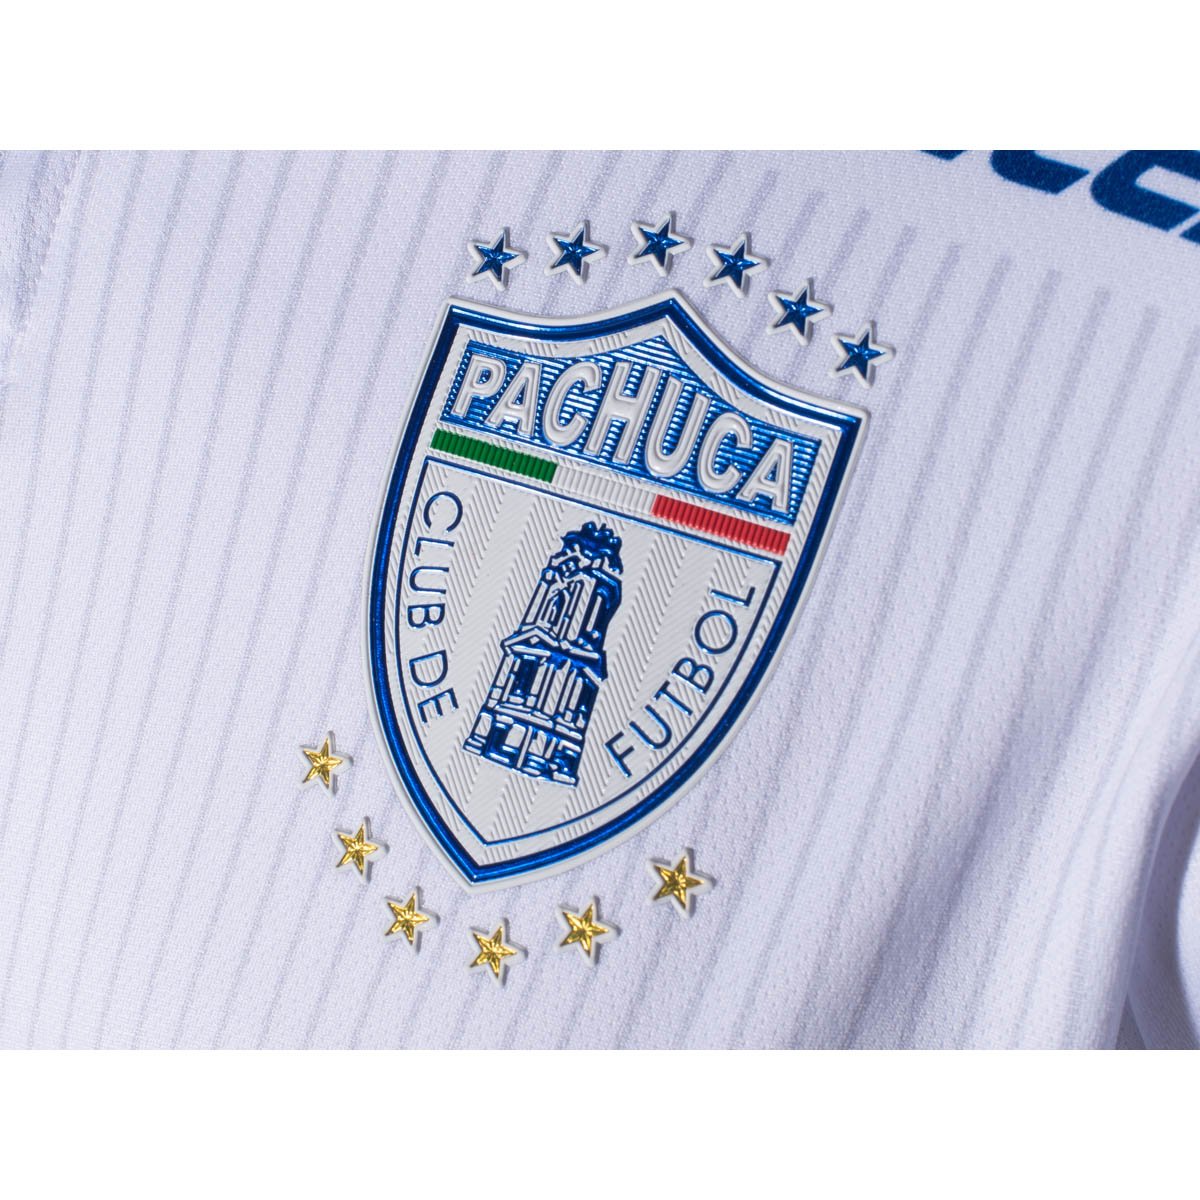 Jersey Pachuca Local 18 - 19 / R&eacute;plica Charly - Caballero